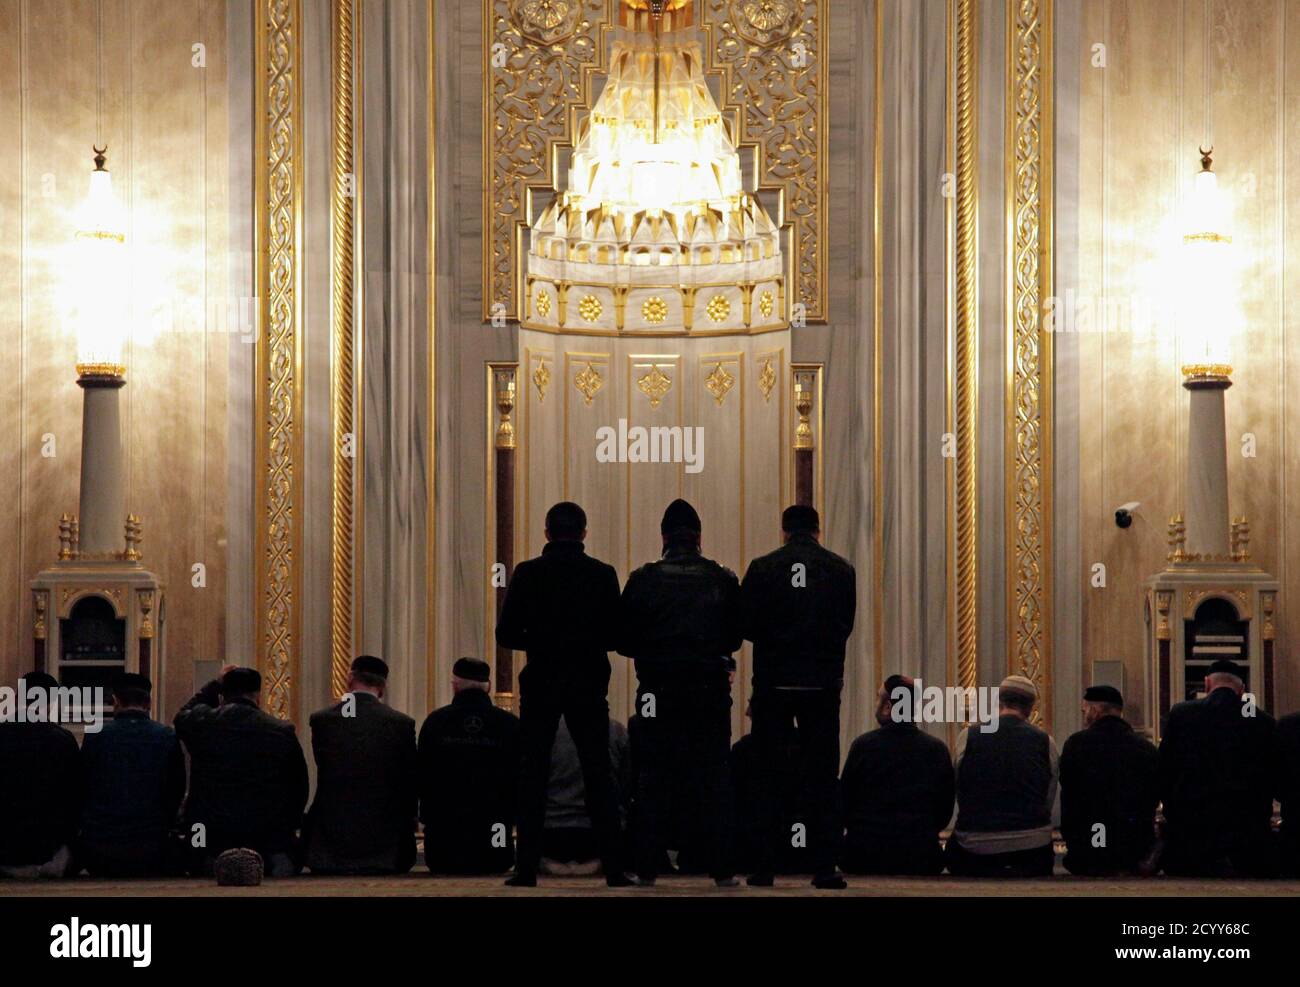 Worshippers perform morning prayers in the central mosque in Grozny March 10, 2011. The central mosque was opened in 2008, a prominent example of the rebuilding of the Chechen capital that was devastated during two separatist wars since 1994. REUTERS/Diana Markosian (RUSSIA - Tags: RELIGION POLITICS) Stock Photo